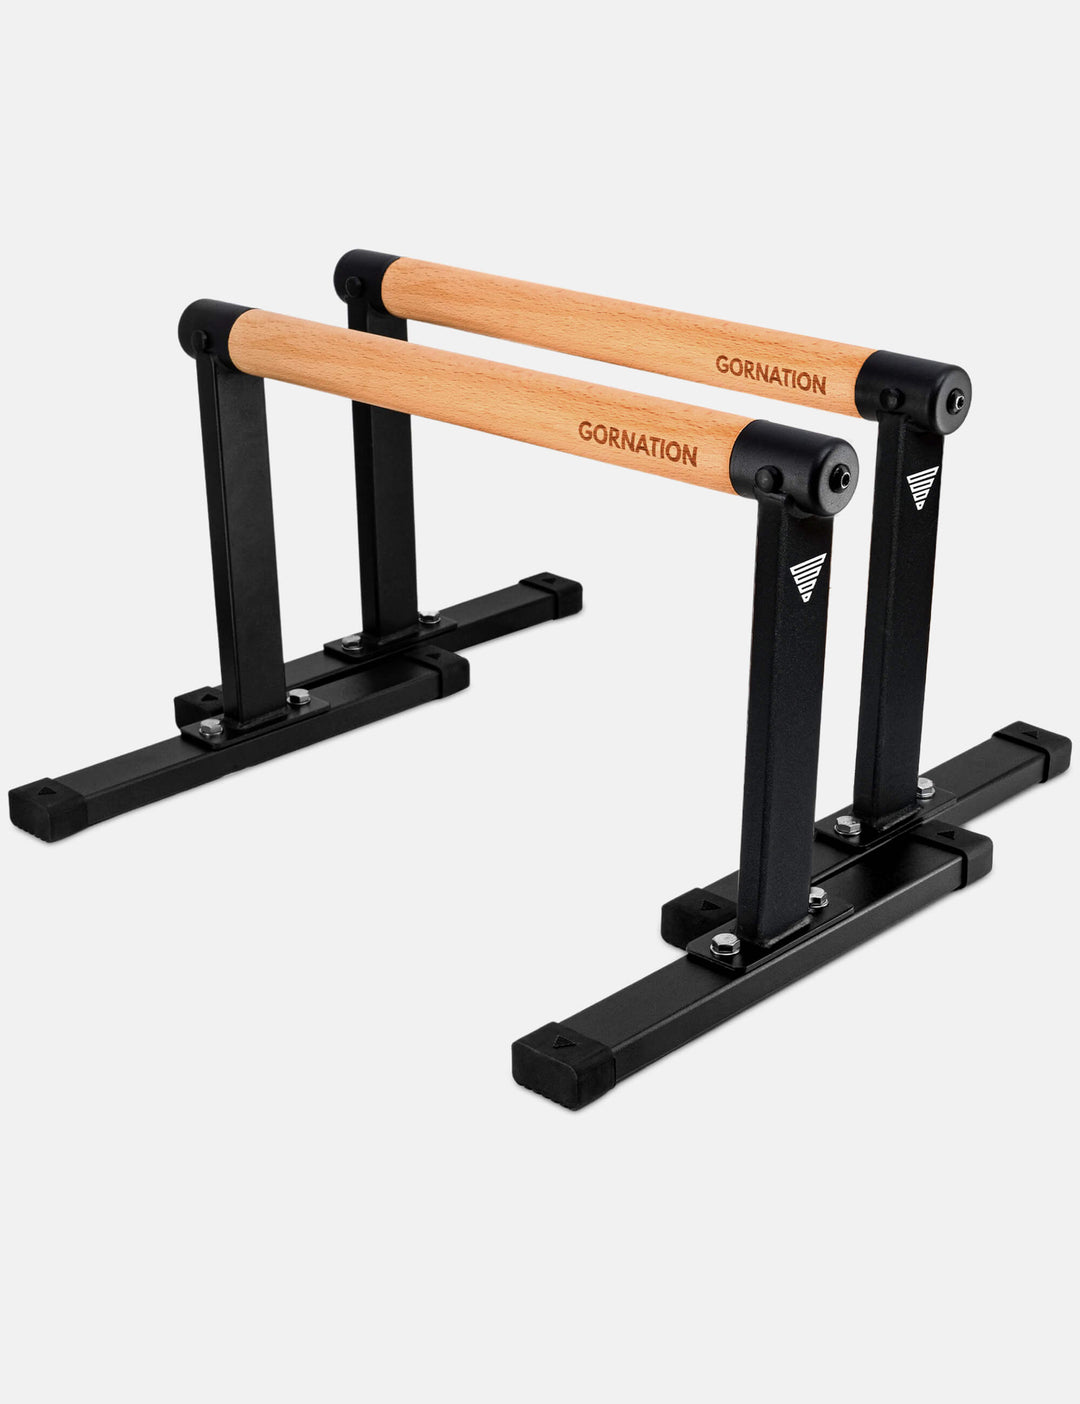 Parallettes Max for Calisthenics Home & Outdoor Workout